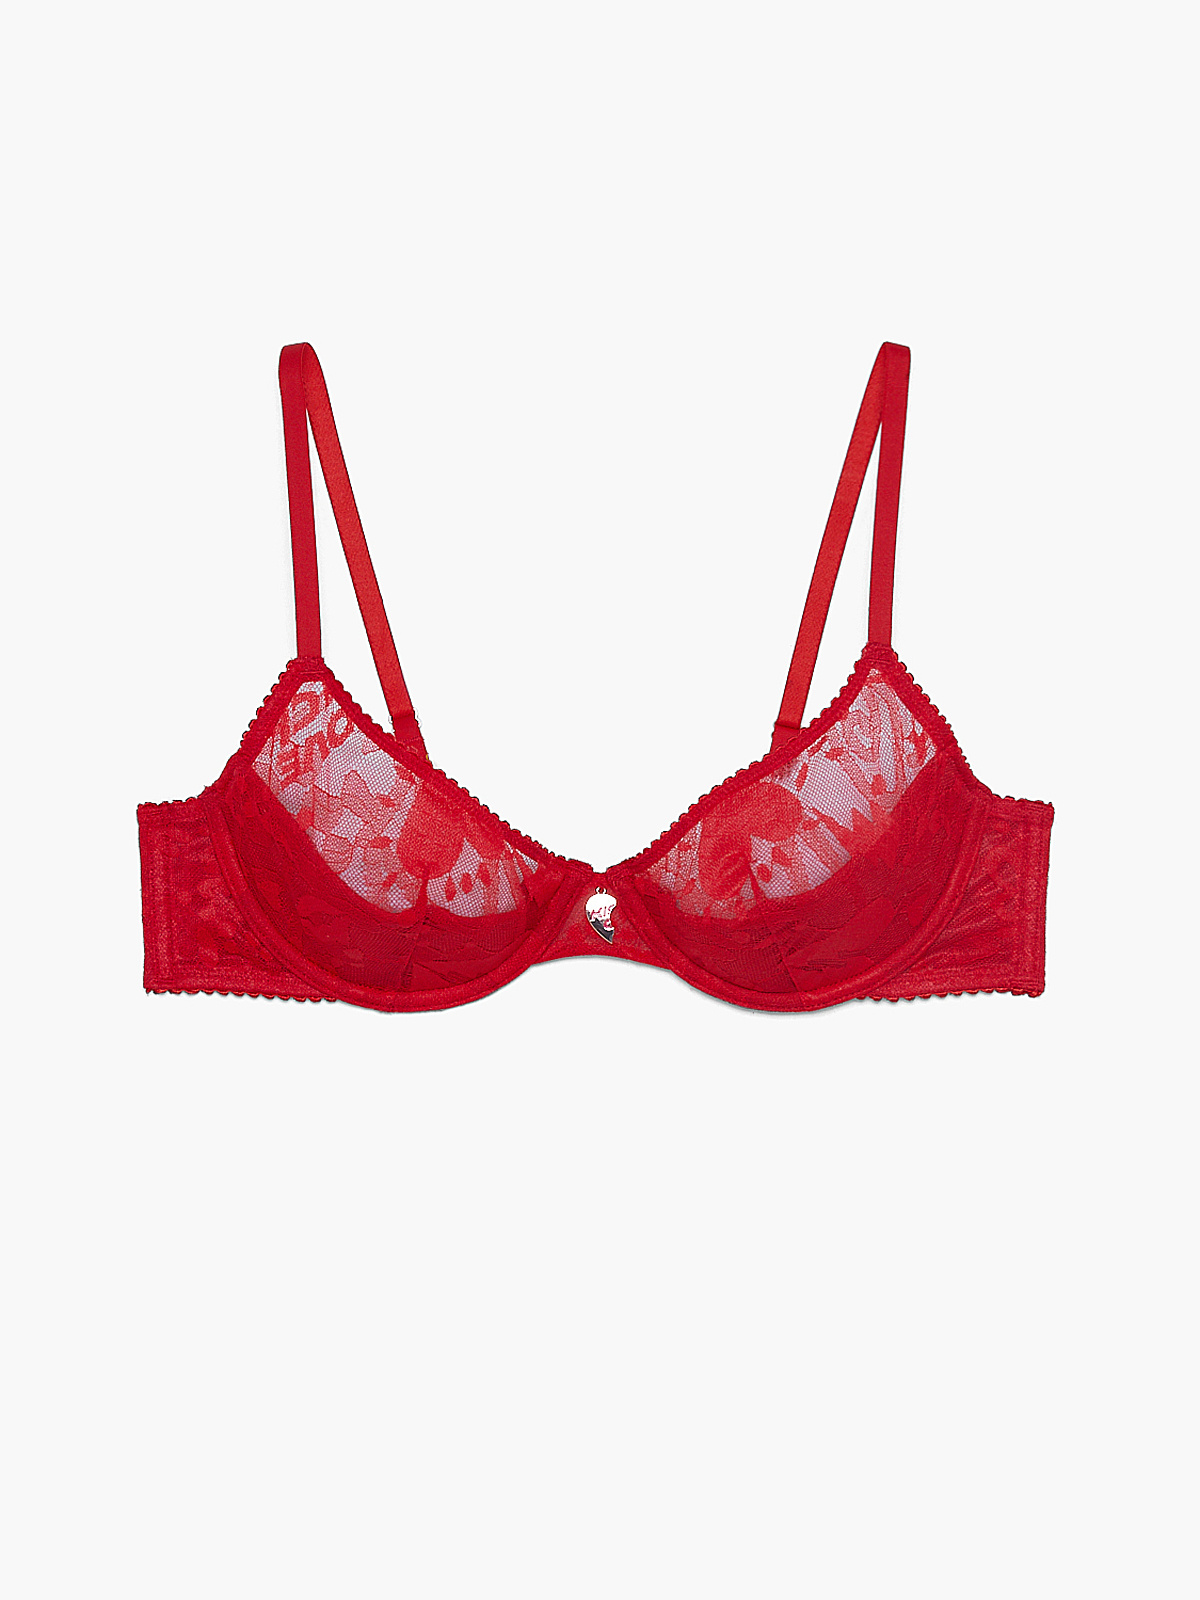 1182 Adore Me red satin and lace underwire bra 40B